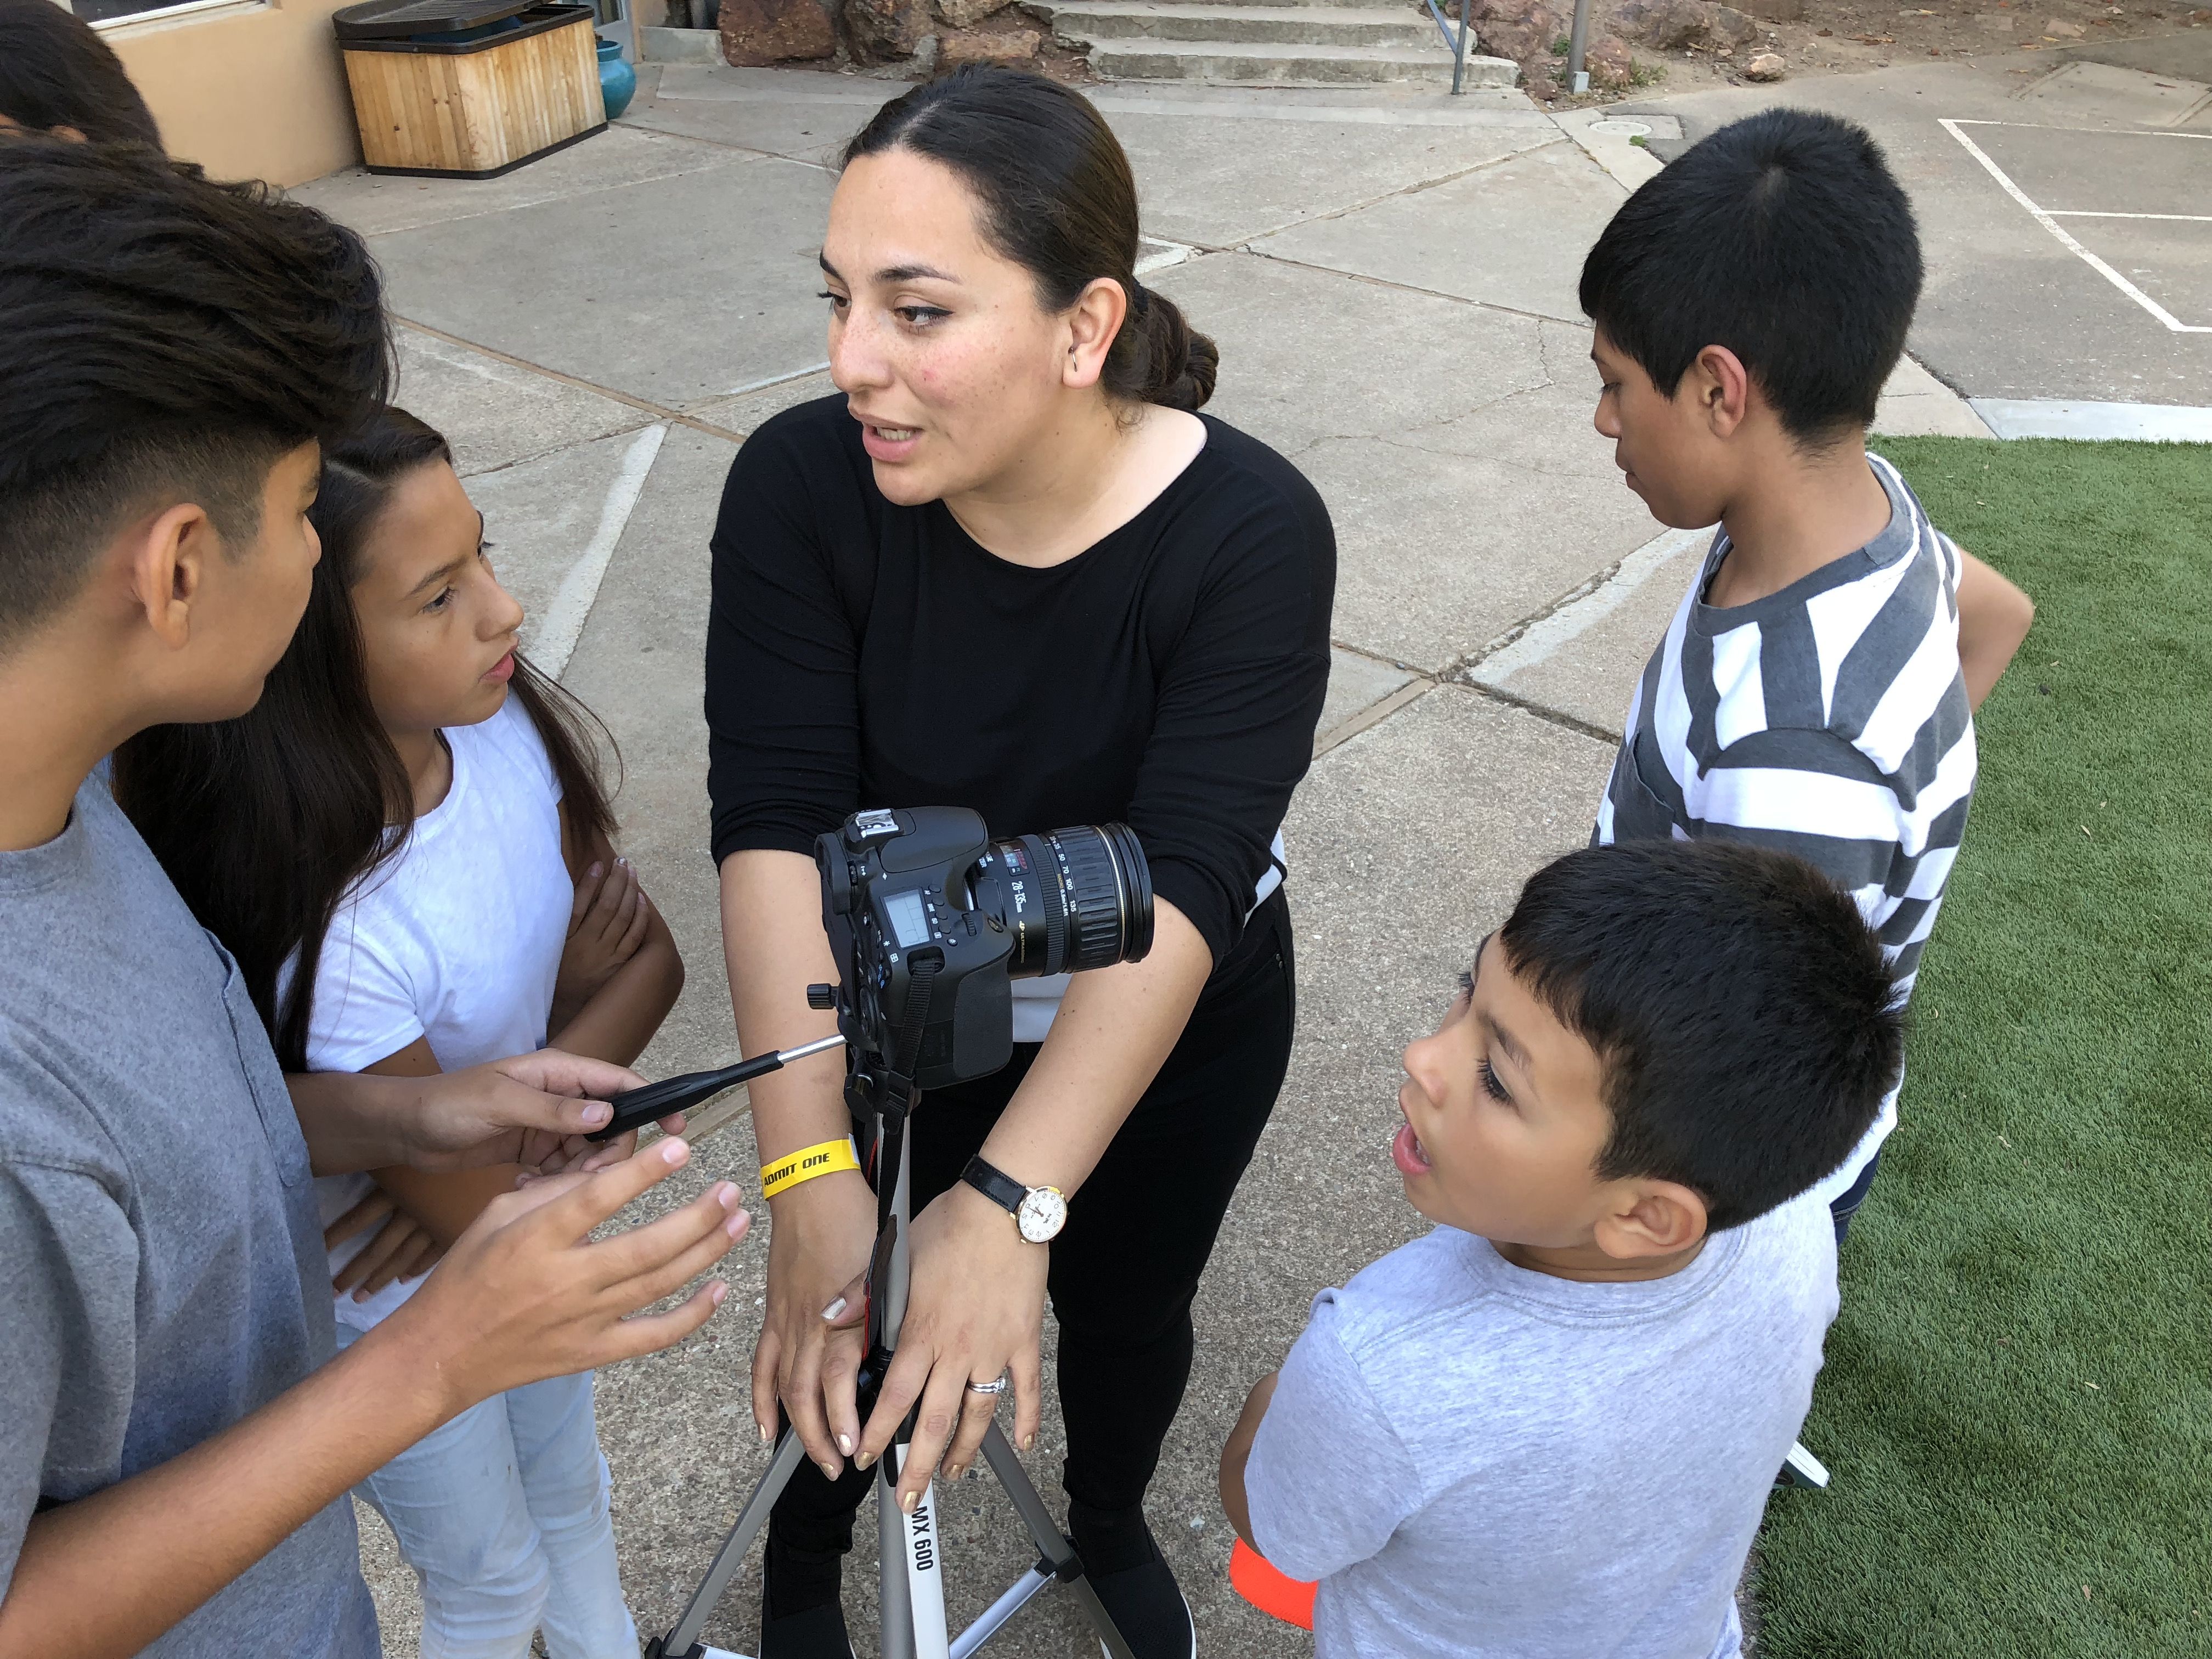 Camp coordinator Astrid Villagran leads kids in the basics of moviemaking. Image by Jaime Joyce for TIME Edge. California, 2018.